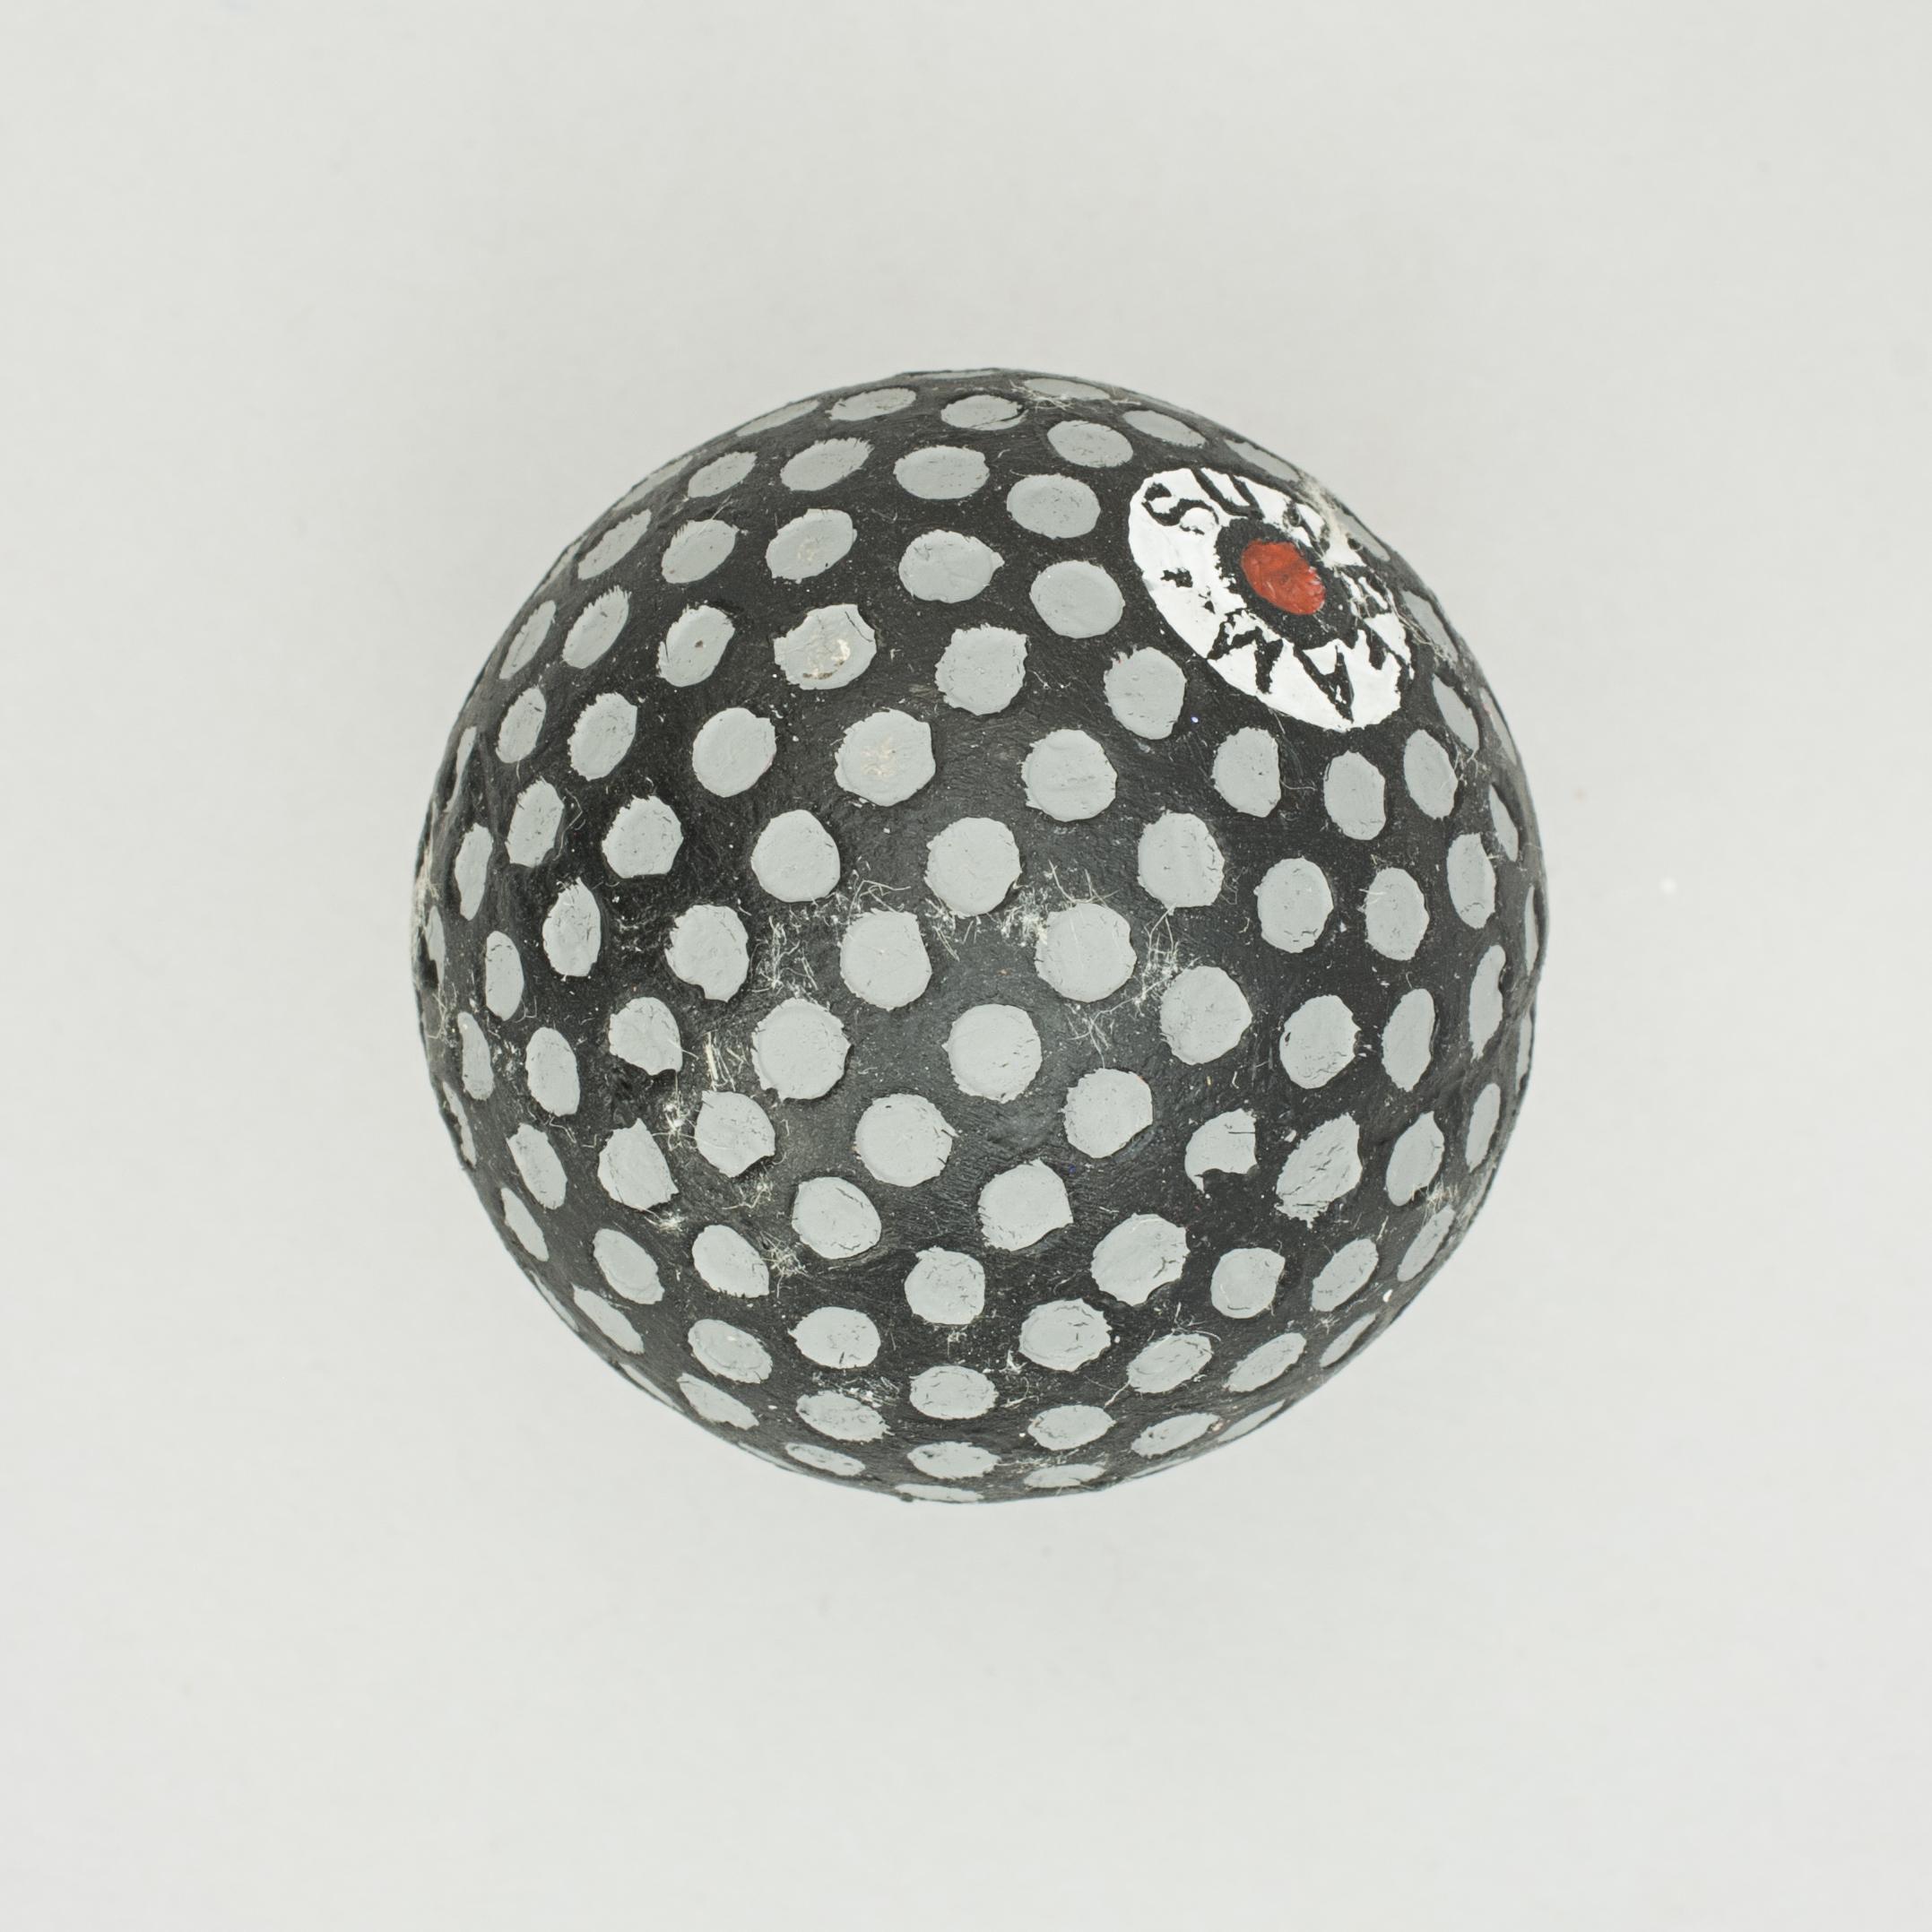 'Sunbeam' Dimple Golf Ball.
A good example of an early dimple patterned rubber core golf ball. The golf ball is in good condition and is manufactured by Capon Heaton & Co., Ltd., Birmingham, England. The ball is marked 'Sunbeam' on both poles and is